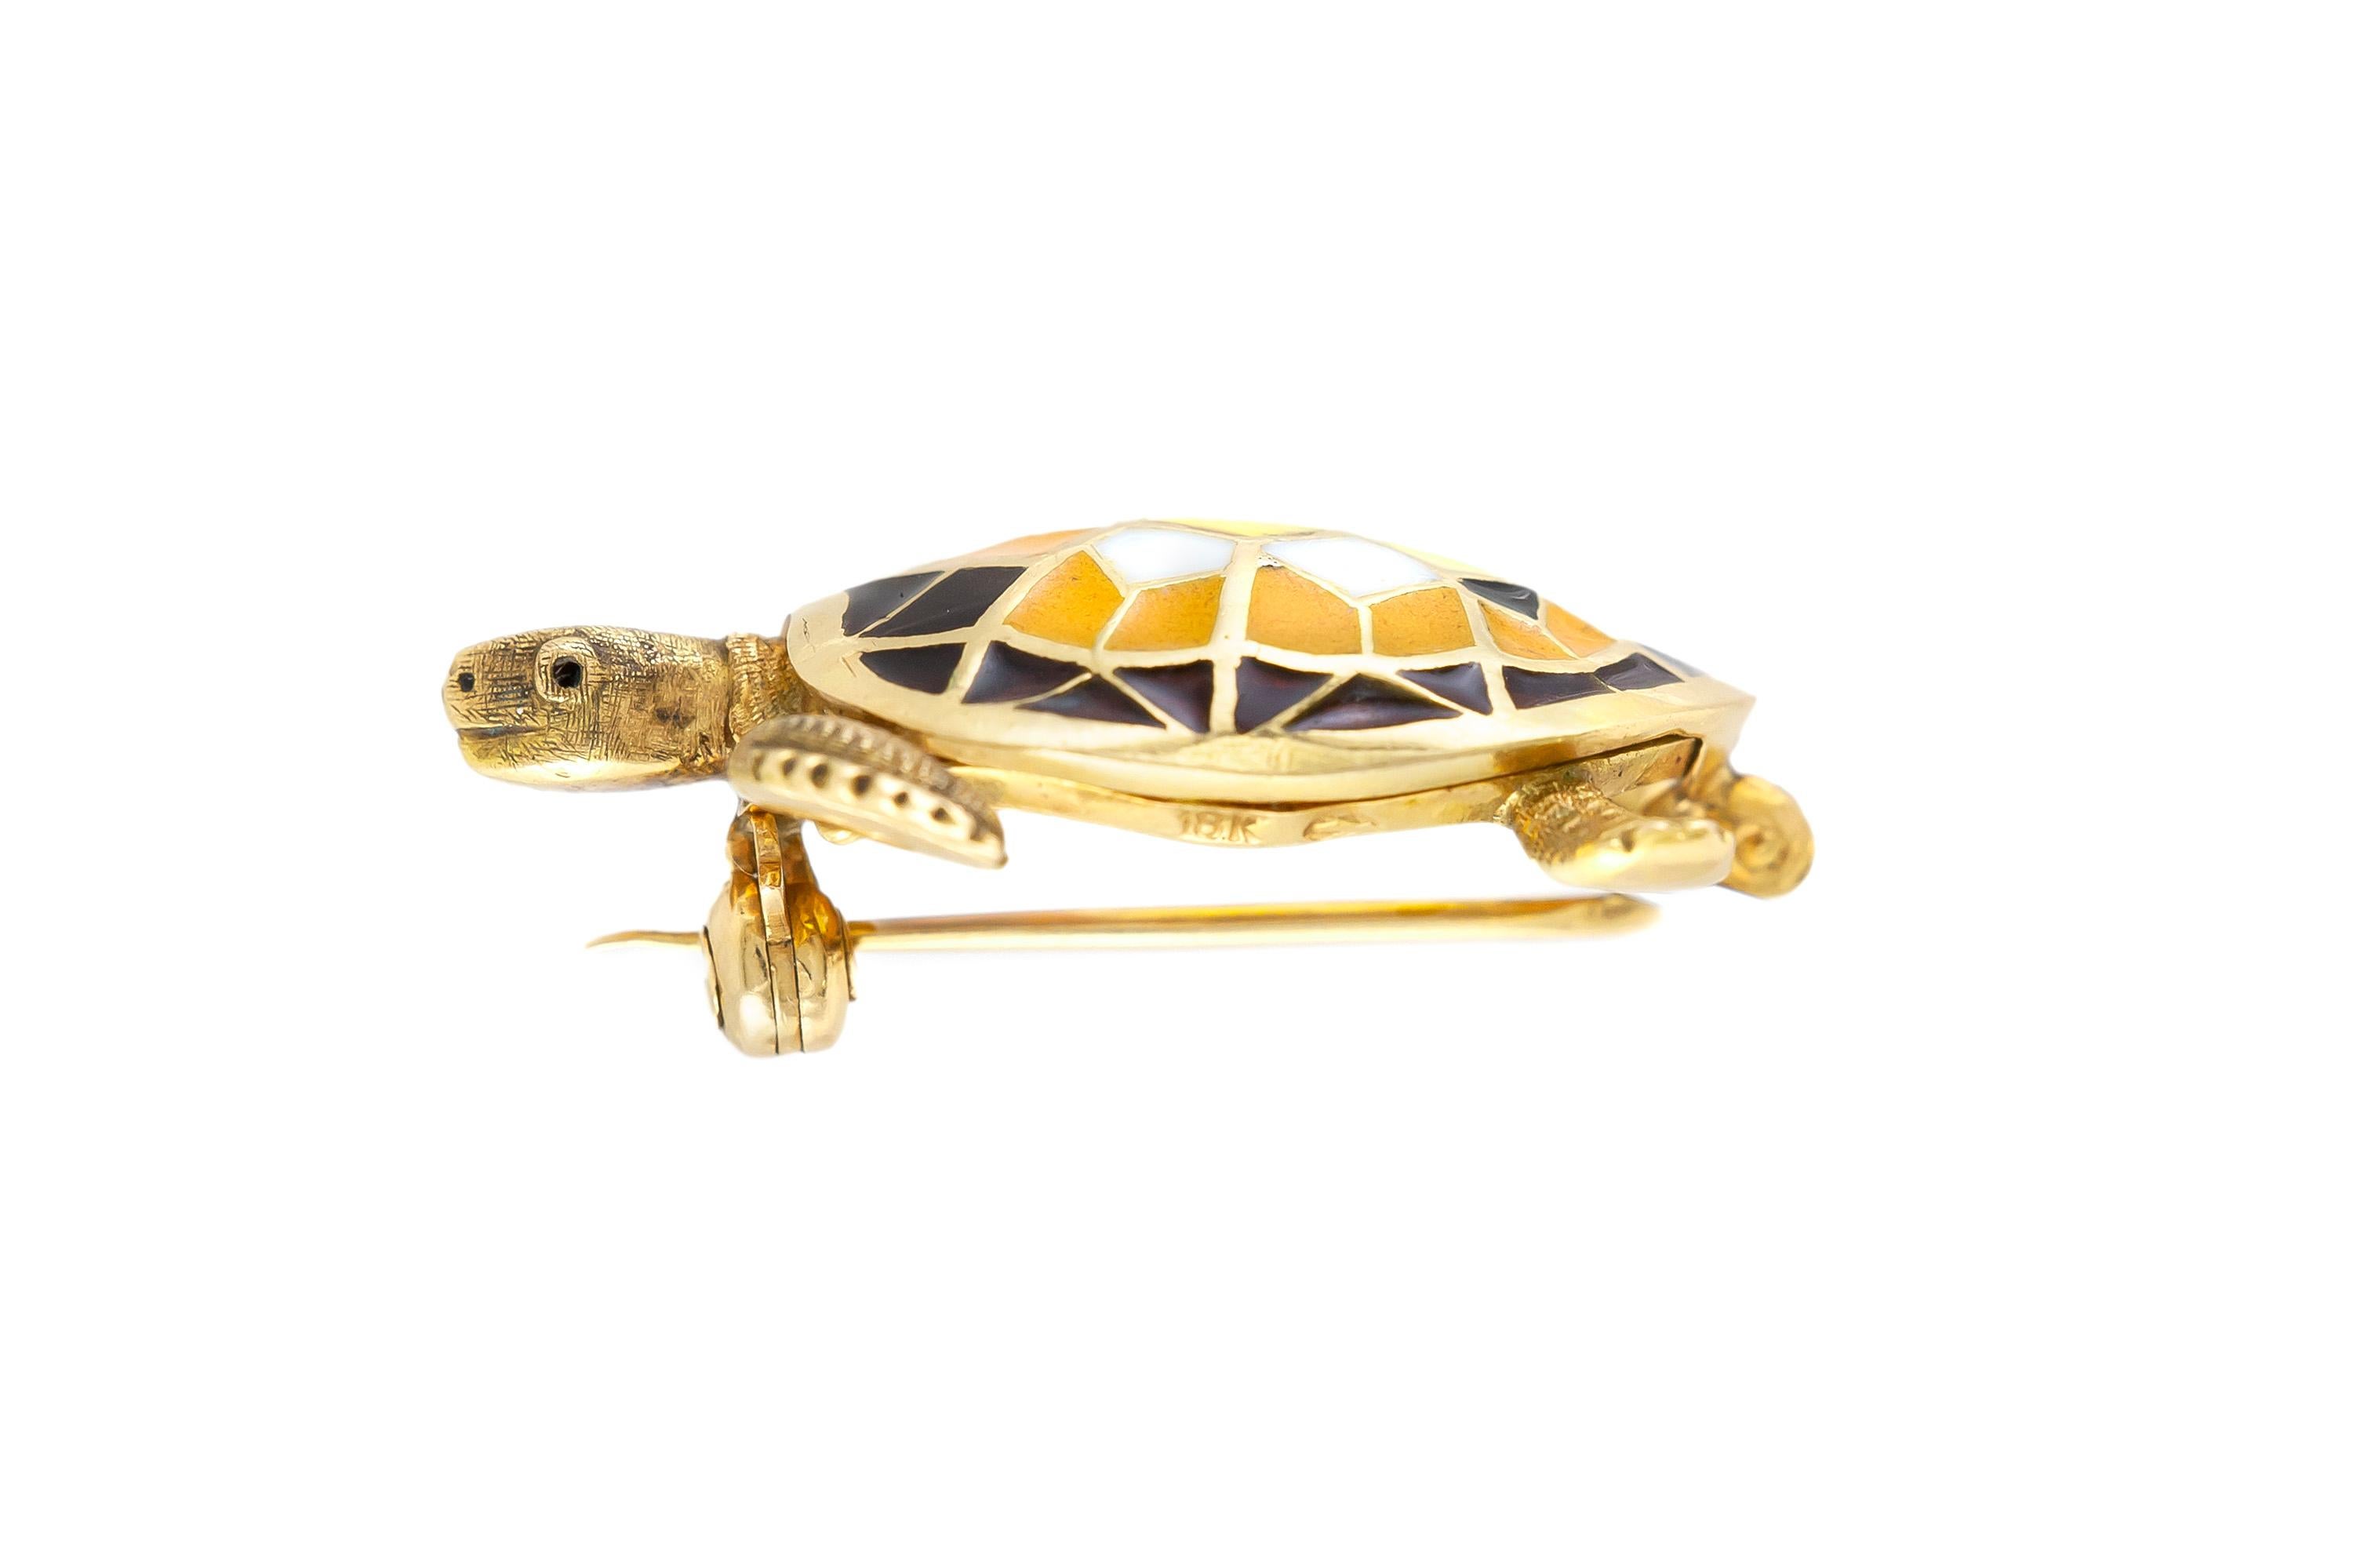 Finely crafted in 18K yellow gold with various colored enamel. Circa 1990.